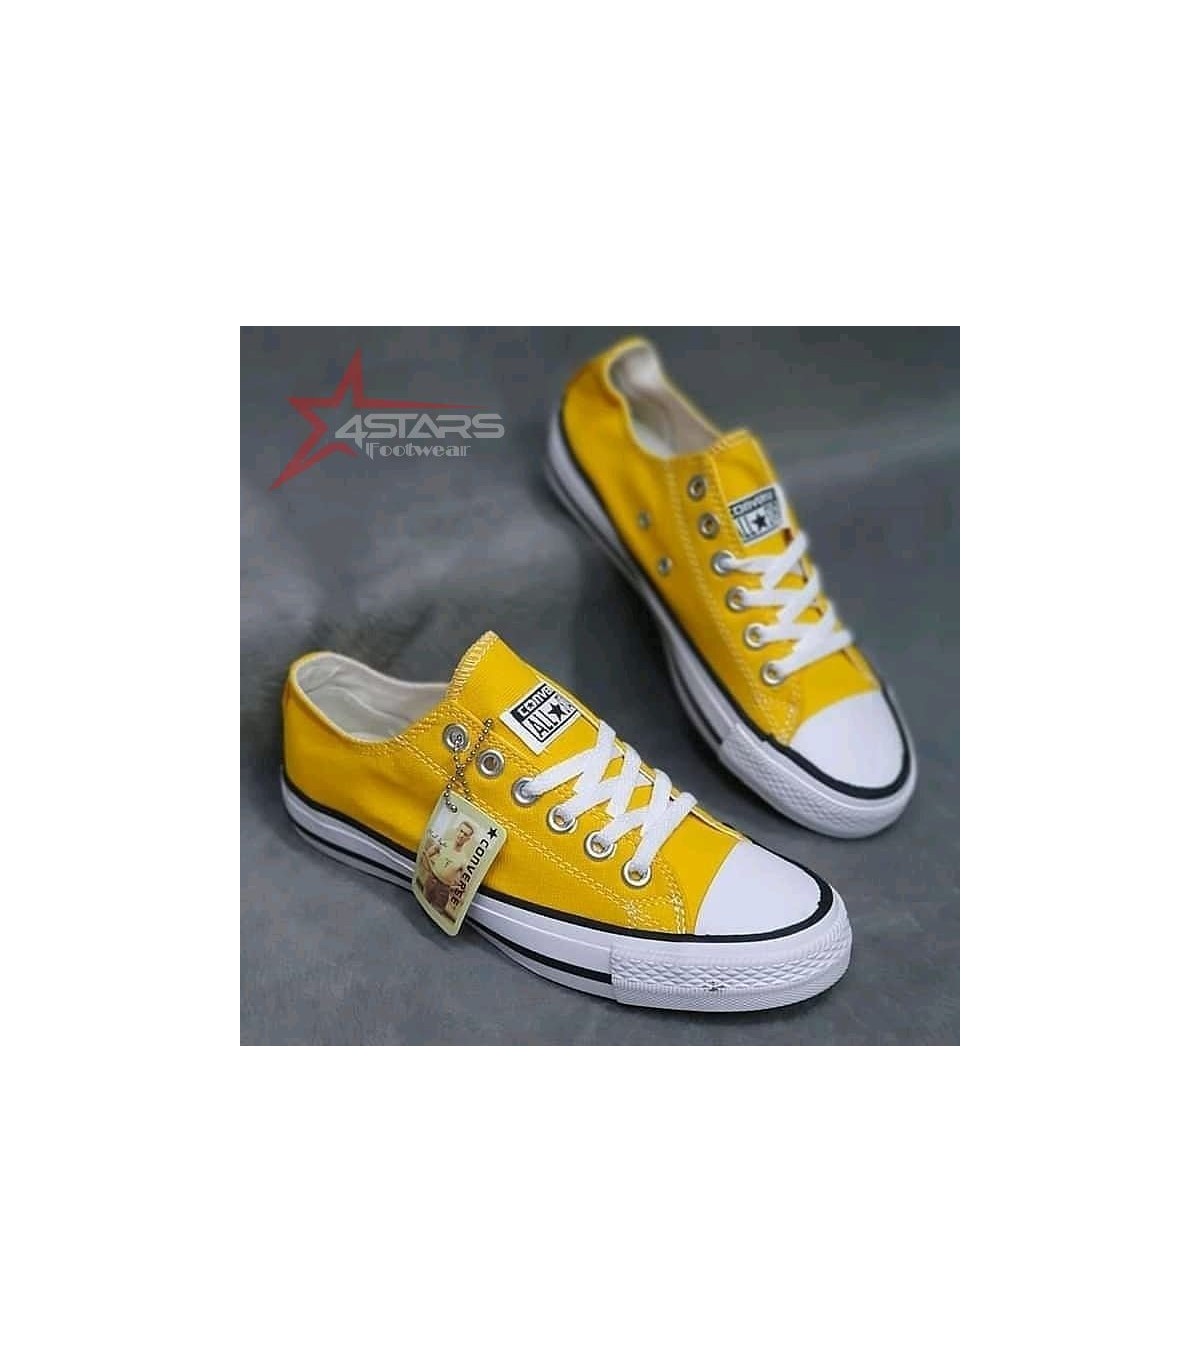 Converse All Star Sneakers - Low Cut Yellow